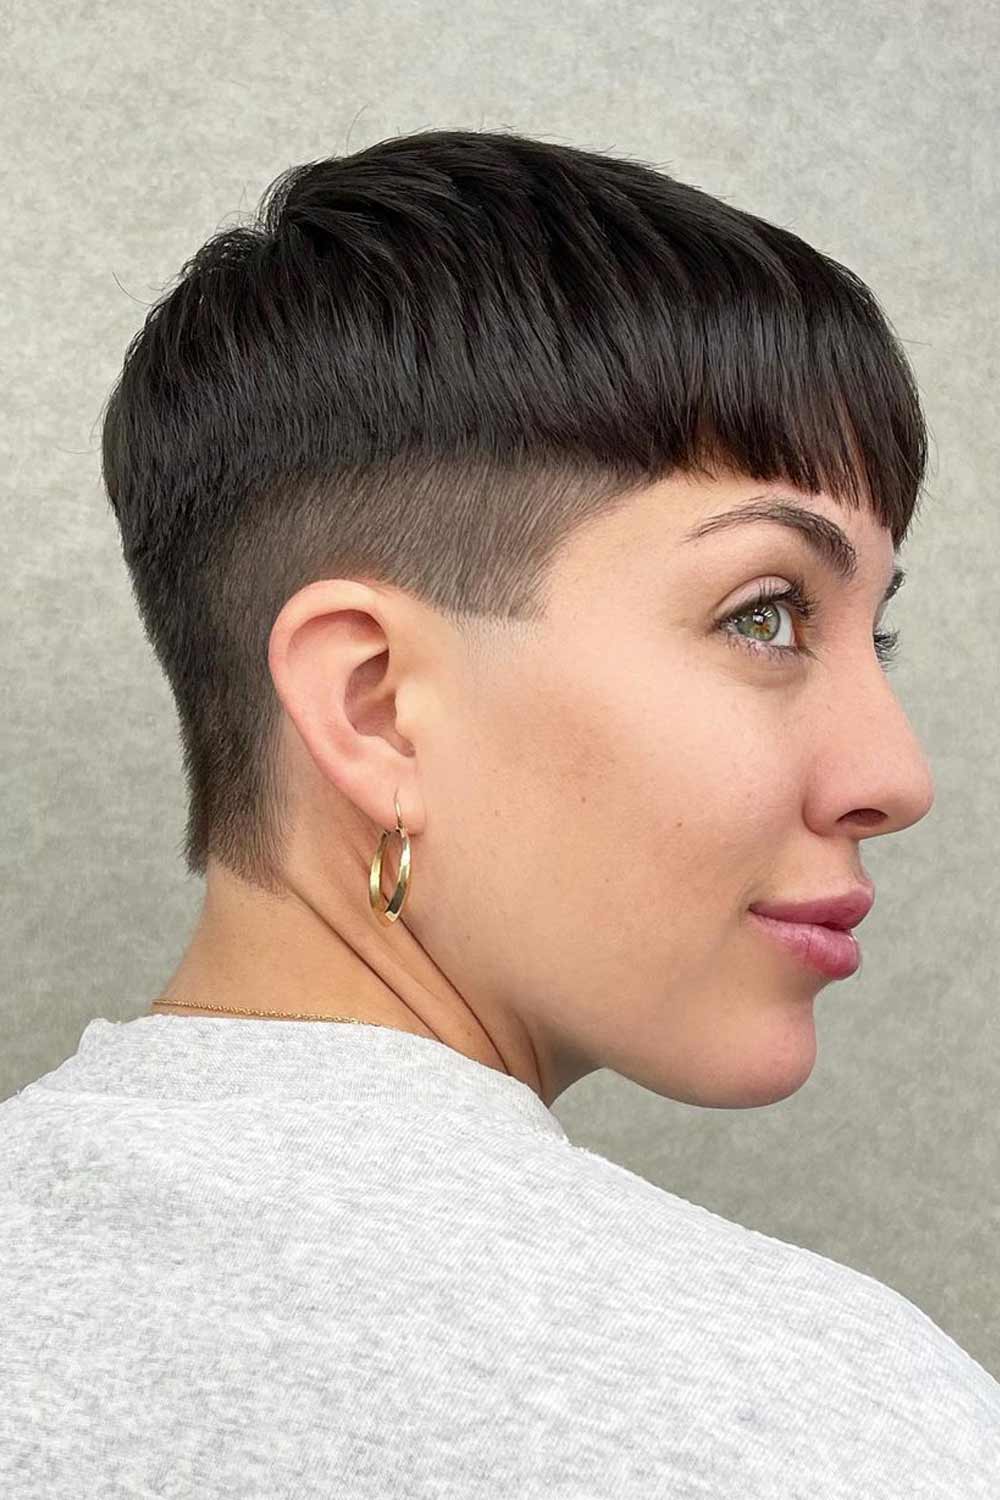 Bowl Cut With Low Fade